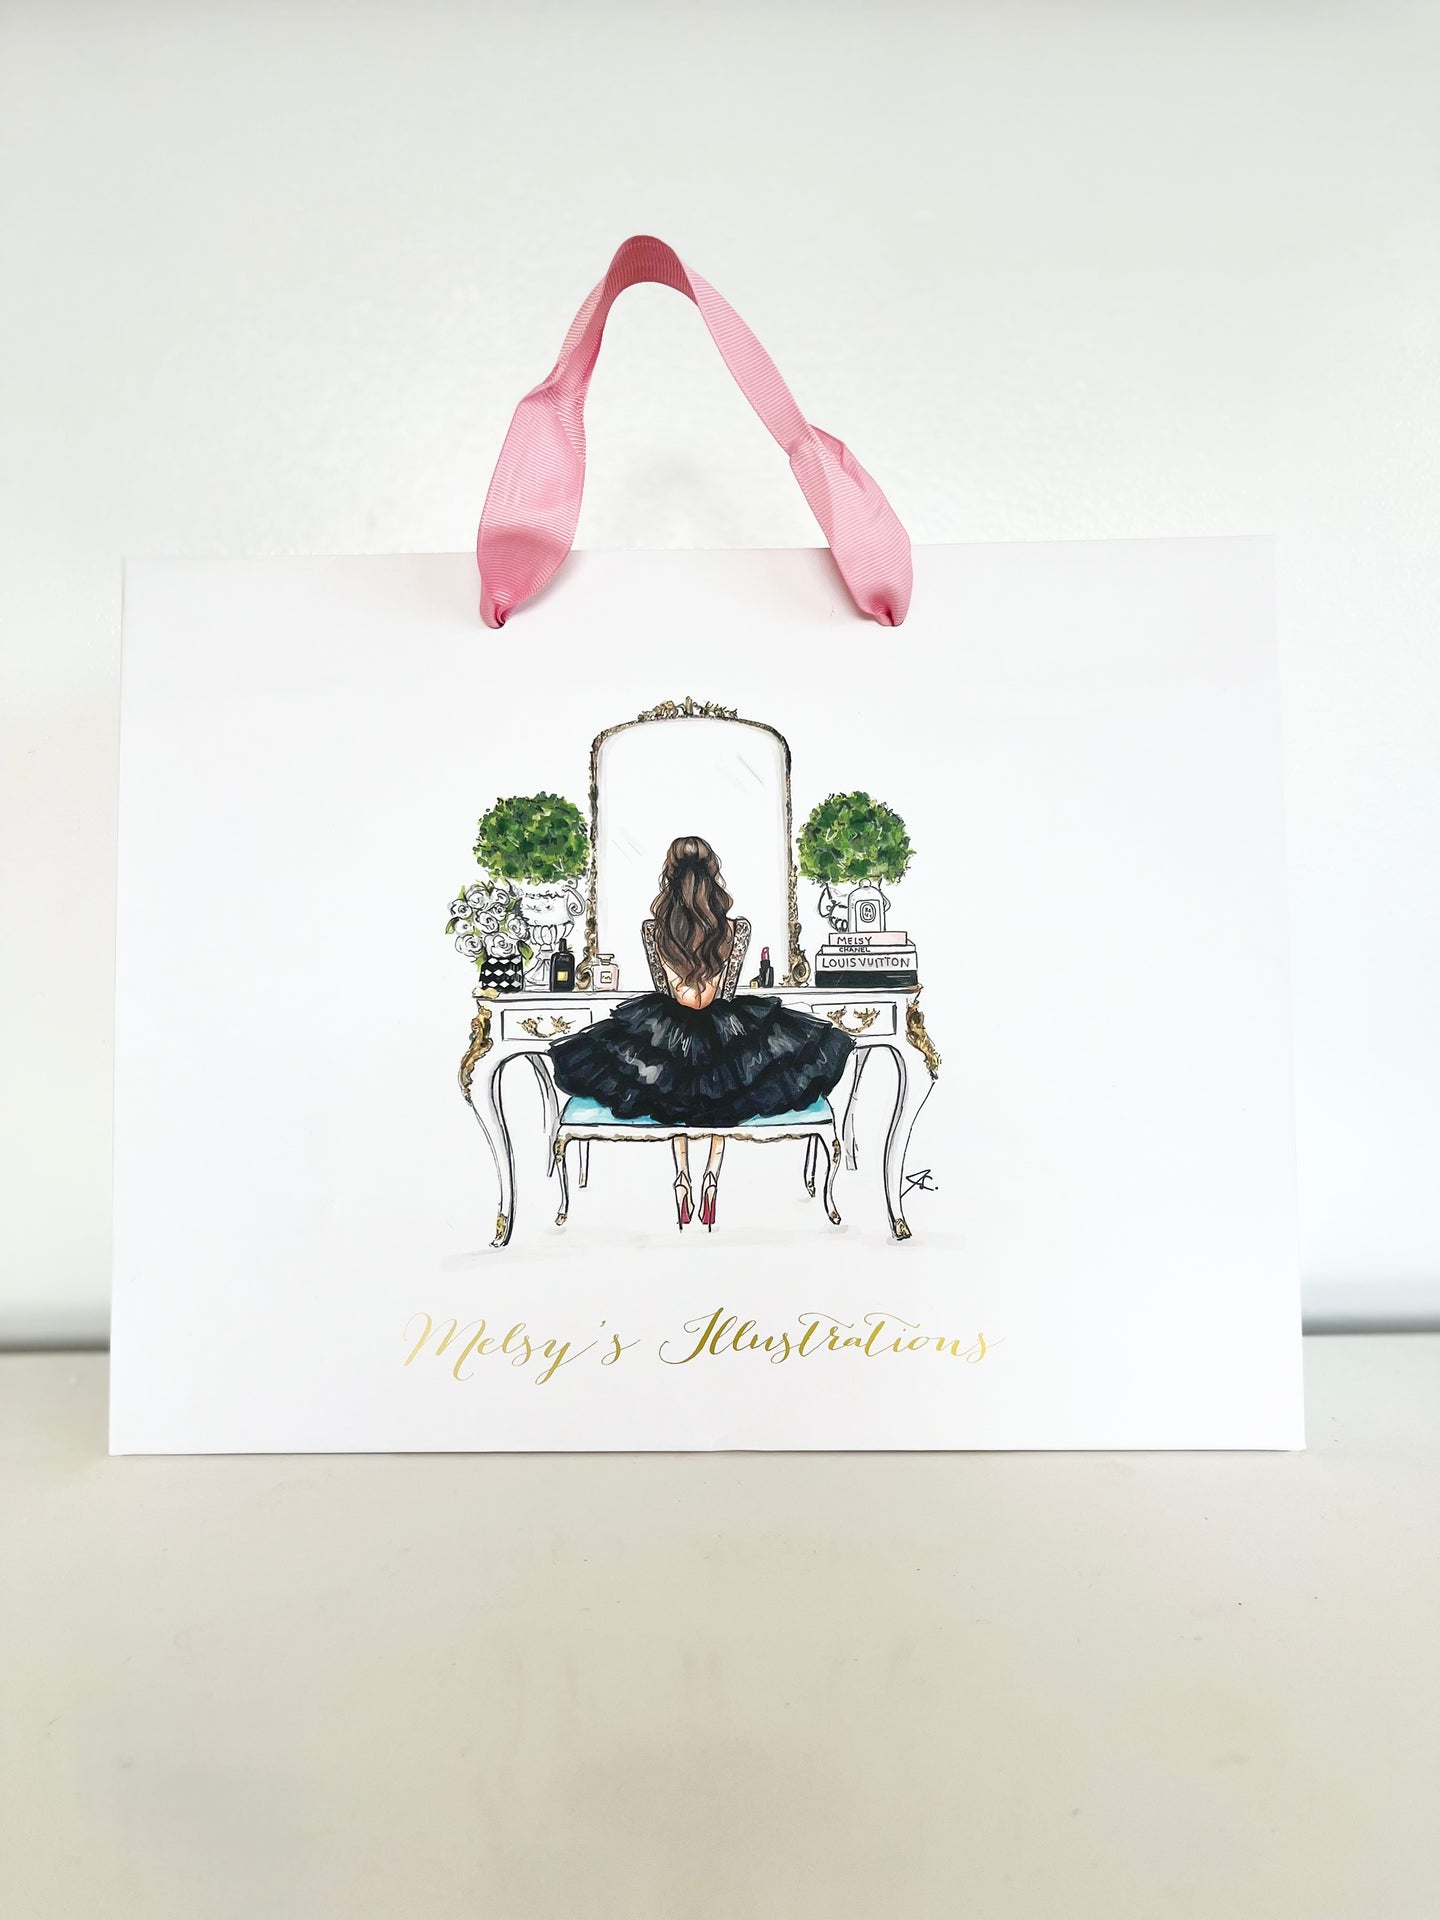 Limited Edition Melsy Gifts Bags